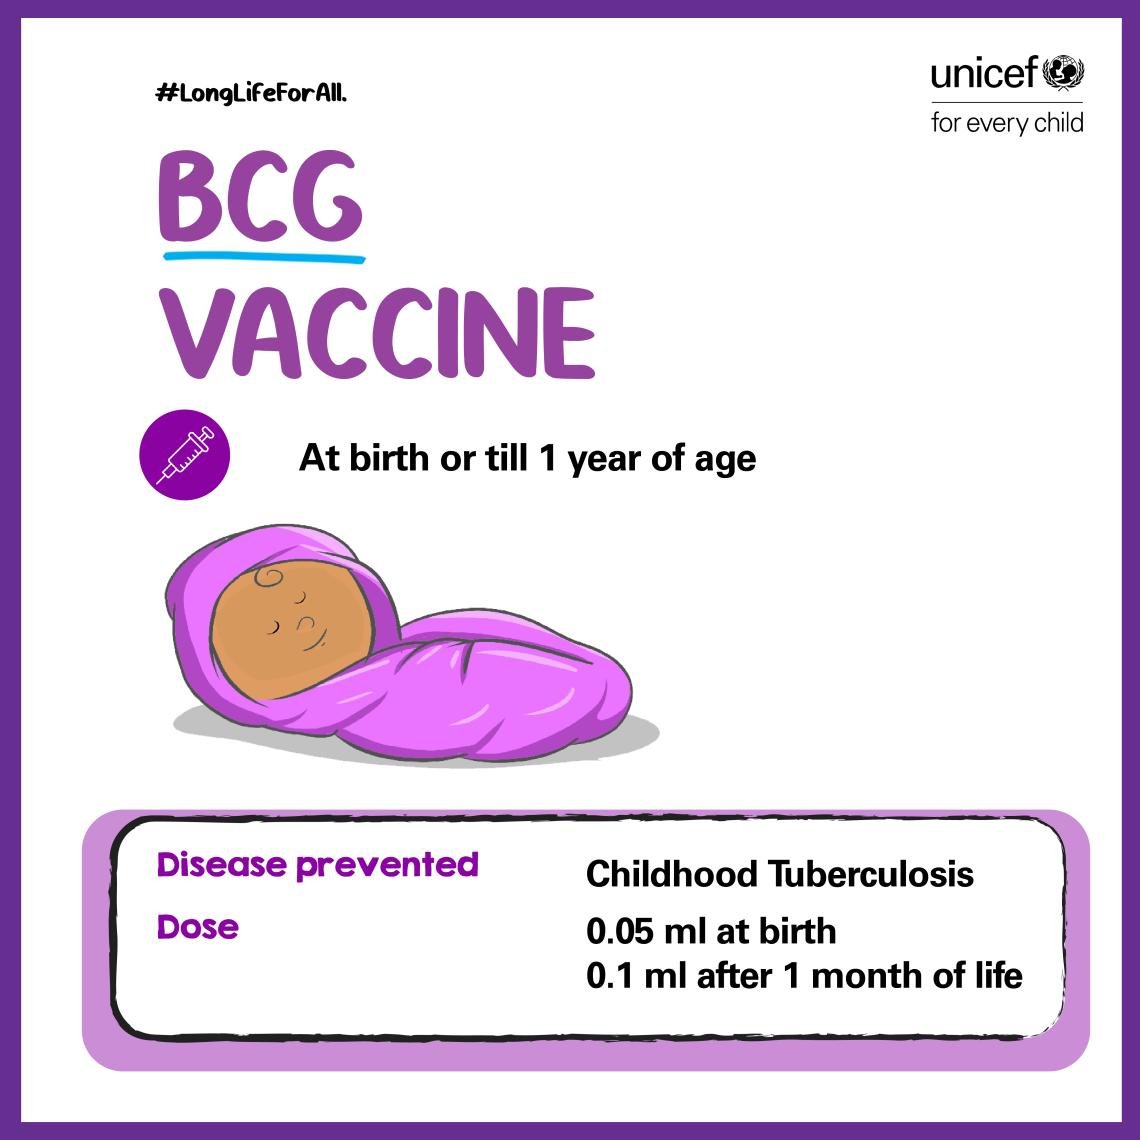 #DYK TB is a major cause of illness & death especially in developing nations. BCG vaccine, existing for 80 years is among the most widely used vaccines, including India's Immunization Program. Let's continue to promote its use to combat TB
#WorldImmunizationWeek #CGforVaccine